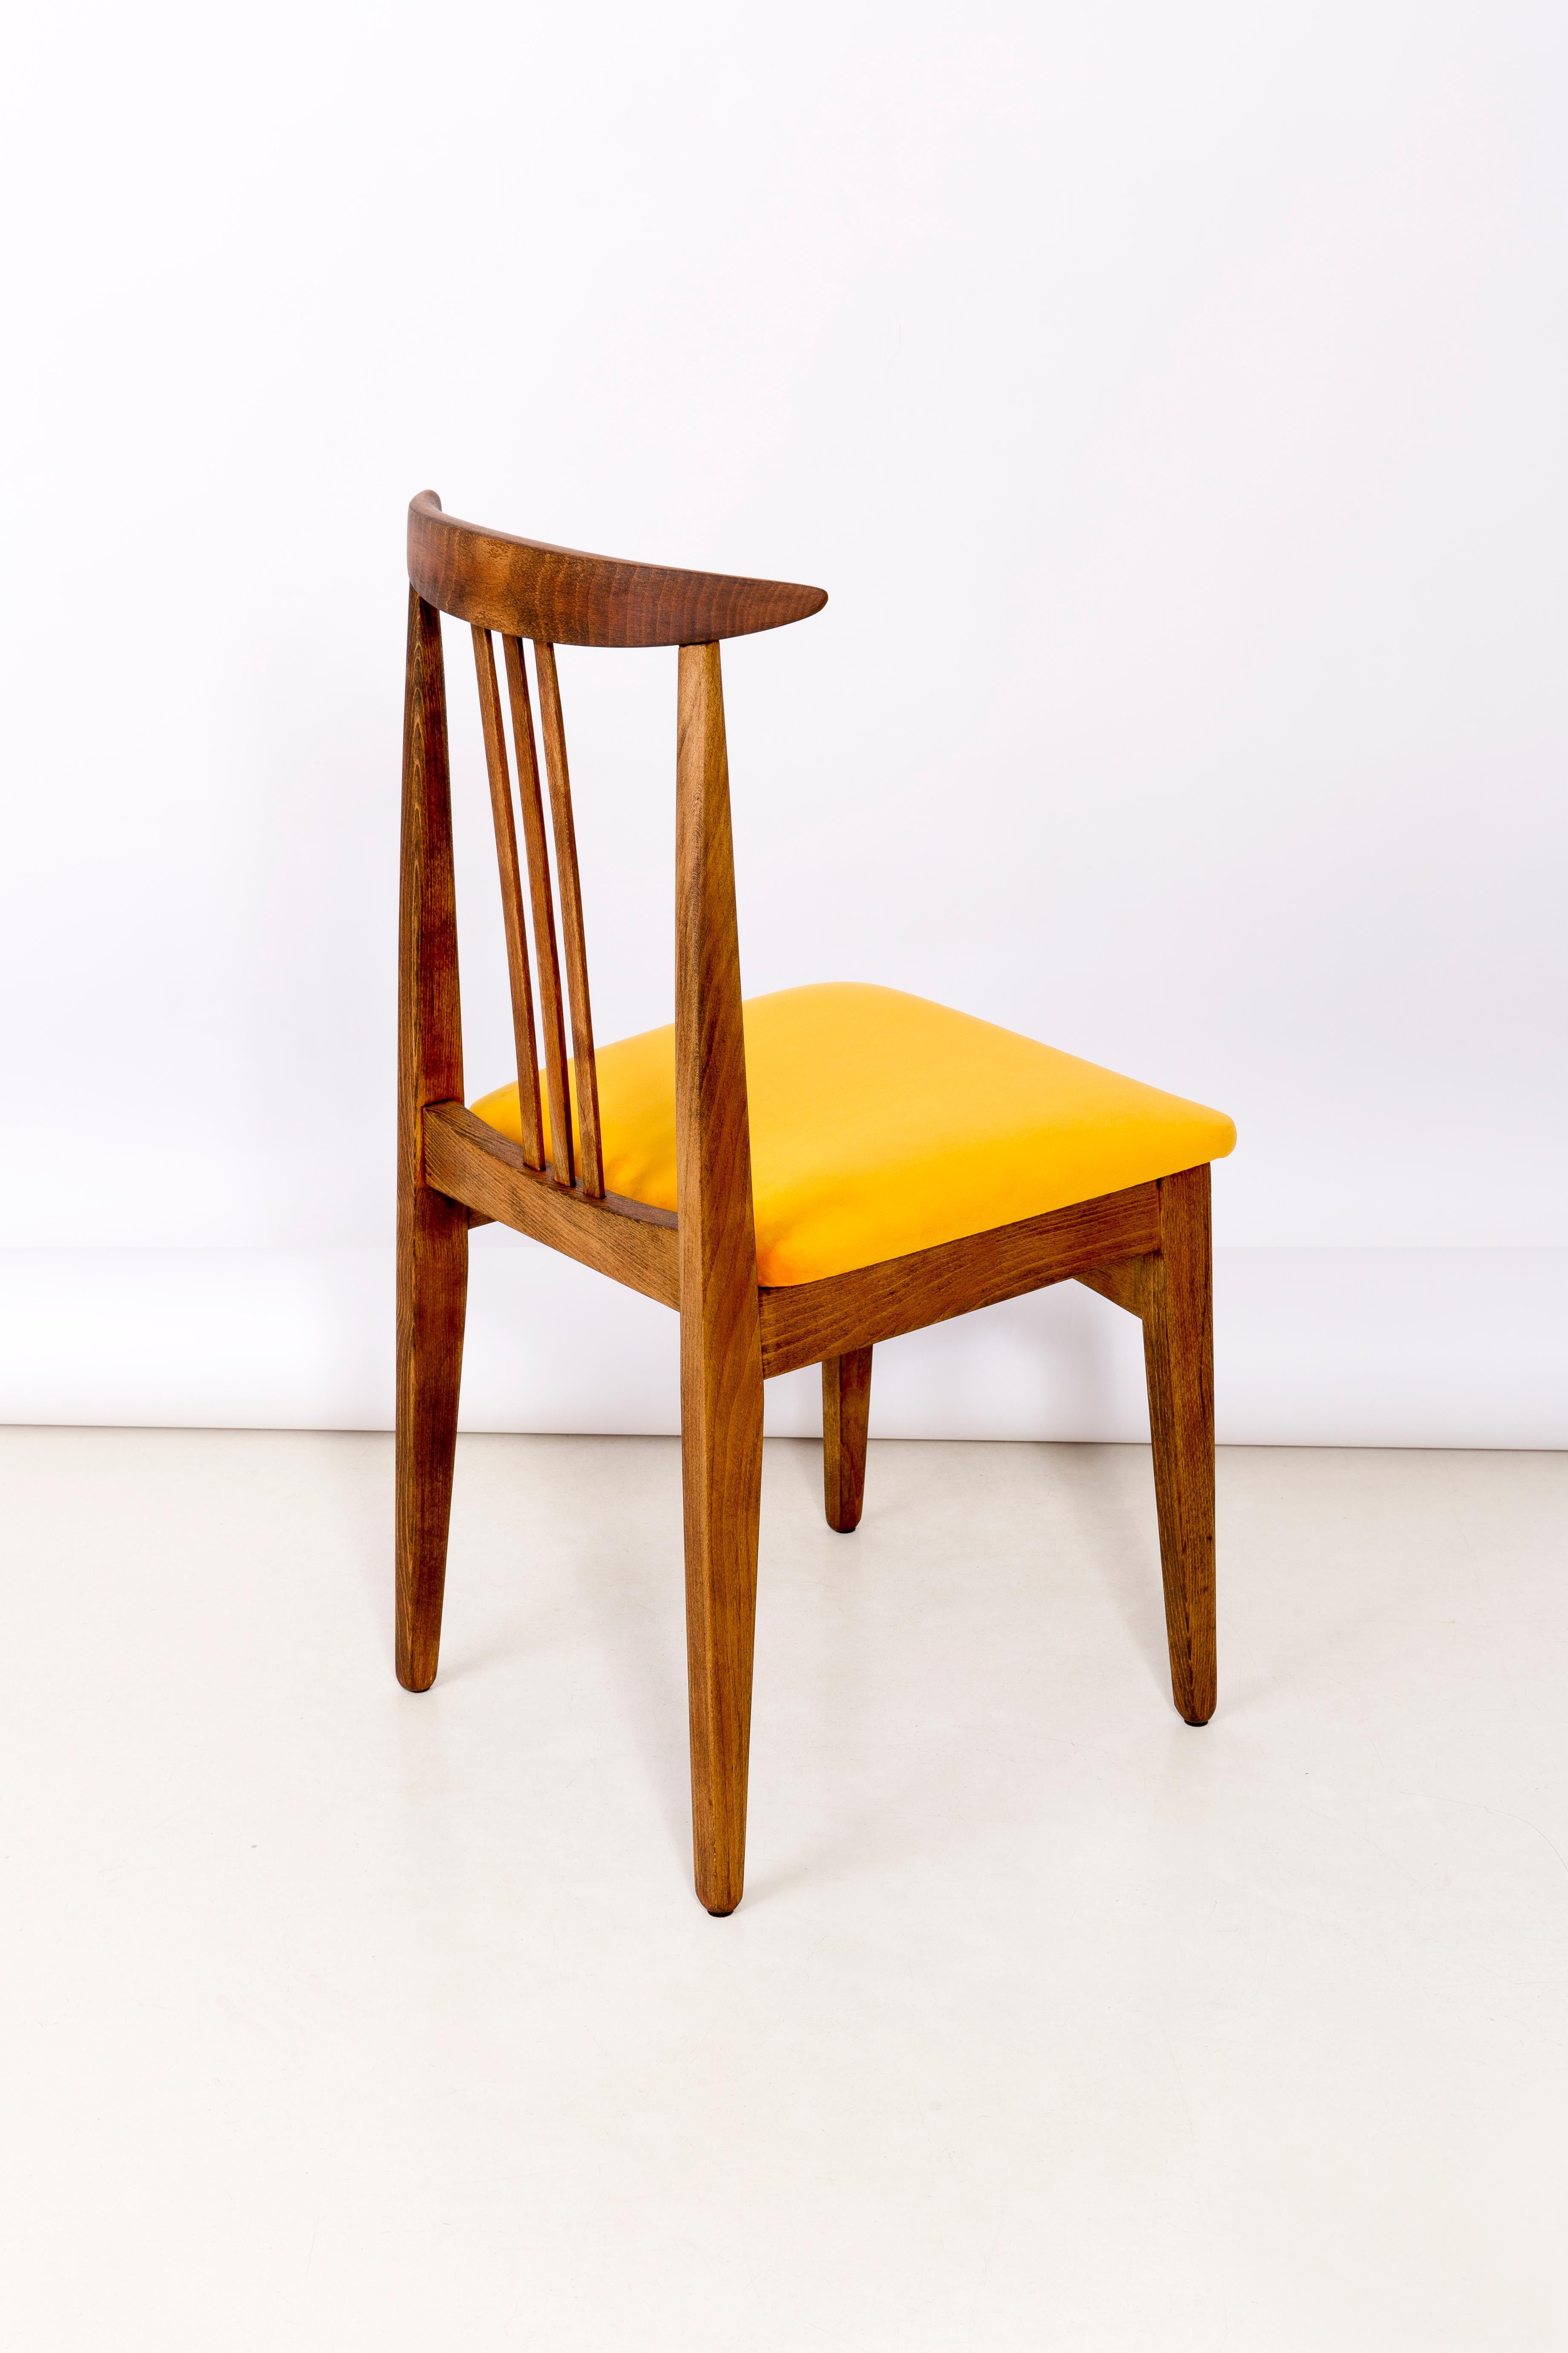 Set of Ten Yellow Chairs, by Zielinski, Europe, 1960s For Sale 3